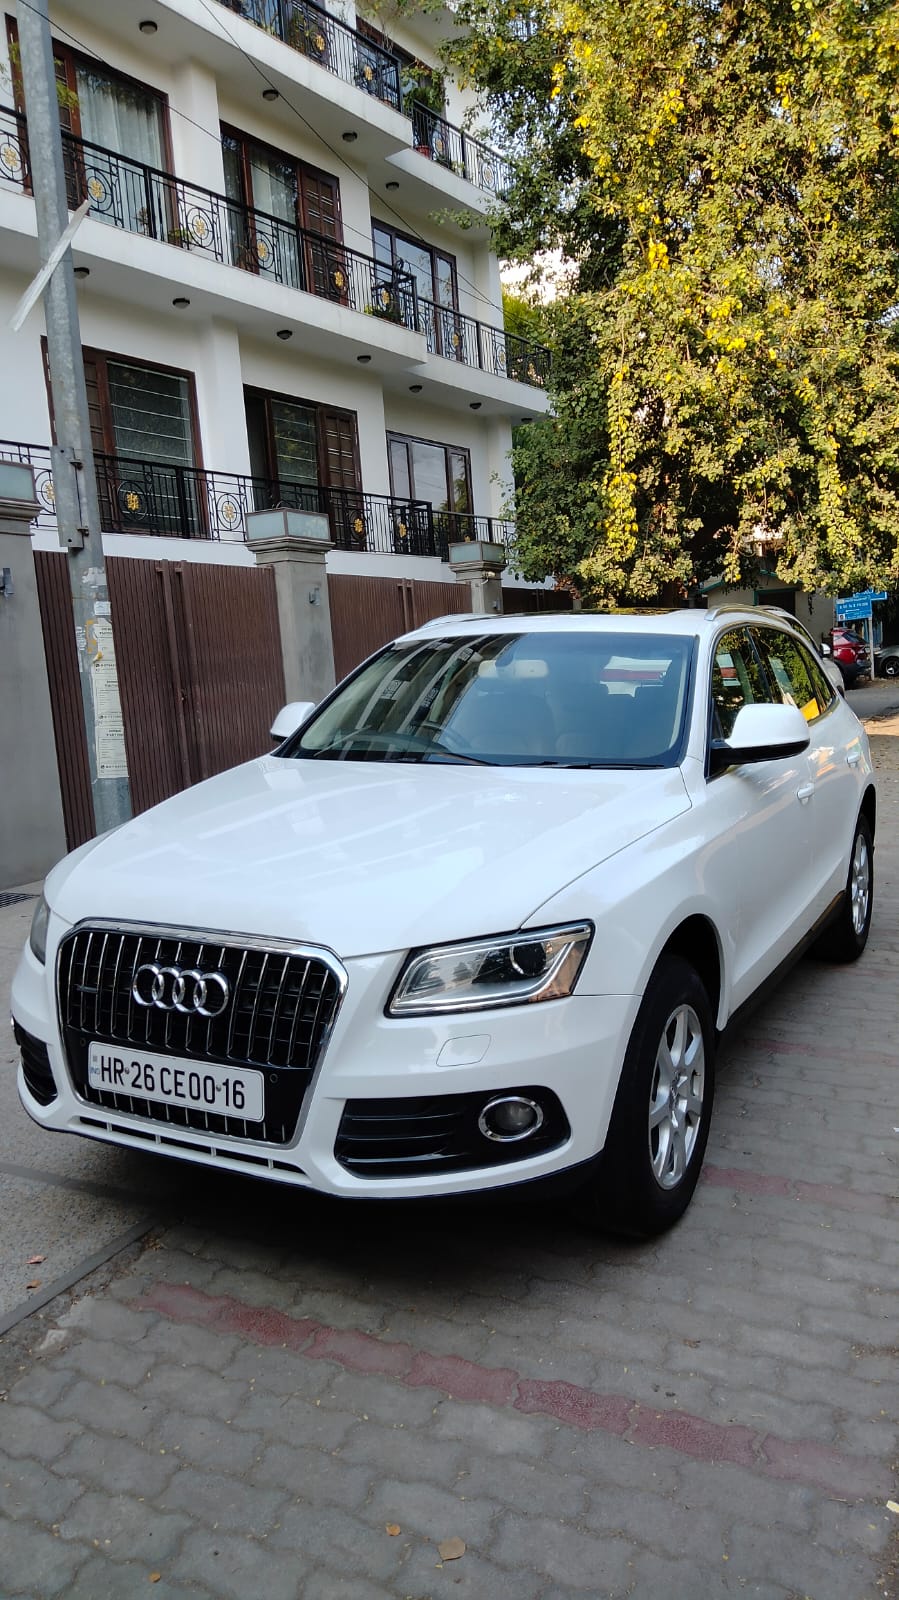 FOR SALE AUDI Q5 2.0 TDI QUATTRO PRIUAM PLUS WITH SUNROOF MODAL 2014 KMS 74600 WITH SERVICE HISTORY 2ND OWNER VIP NUMBER CAR INSHURED TILL 2024 INSHURED VALUE 15,50,000 NO CLIAM BONUS 50 % 2ND KEY AVAILABLE TYERS GOOD CONDITION NEW BATTERY ALL ORIGINAL PAINT CAR SCRECHLESS CAR JOLLY MOTORS CHITTRANJAN PARK SOUTH DELHI 9810012032 9910089032